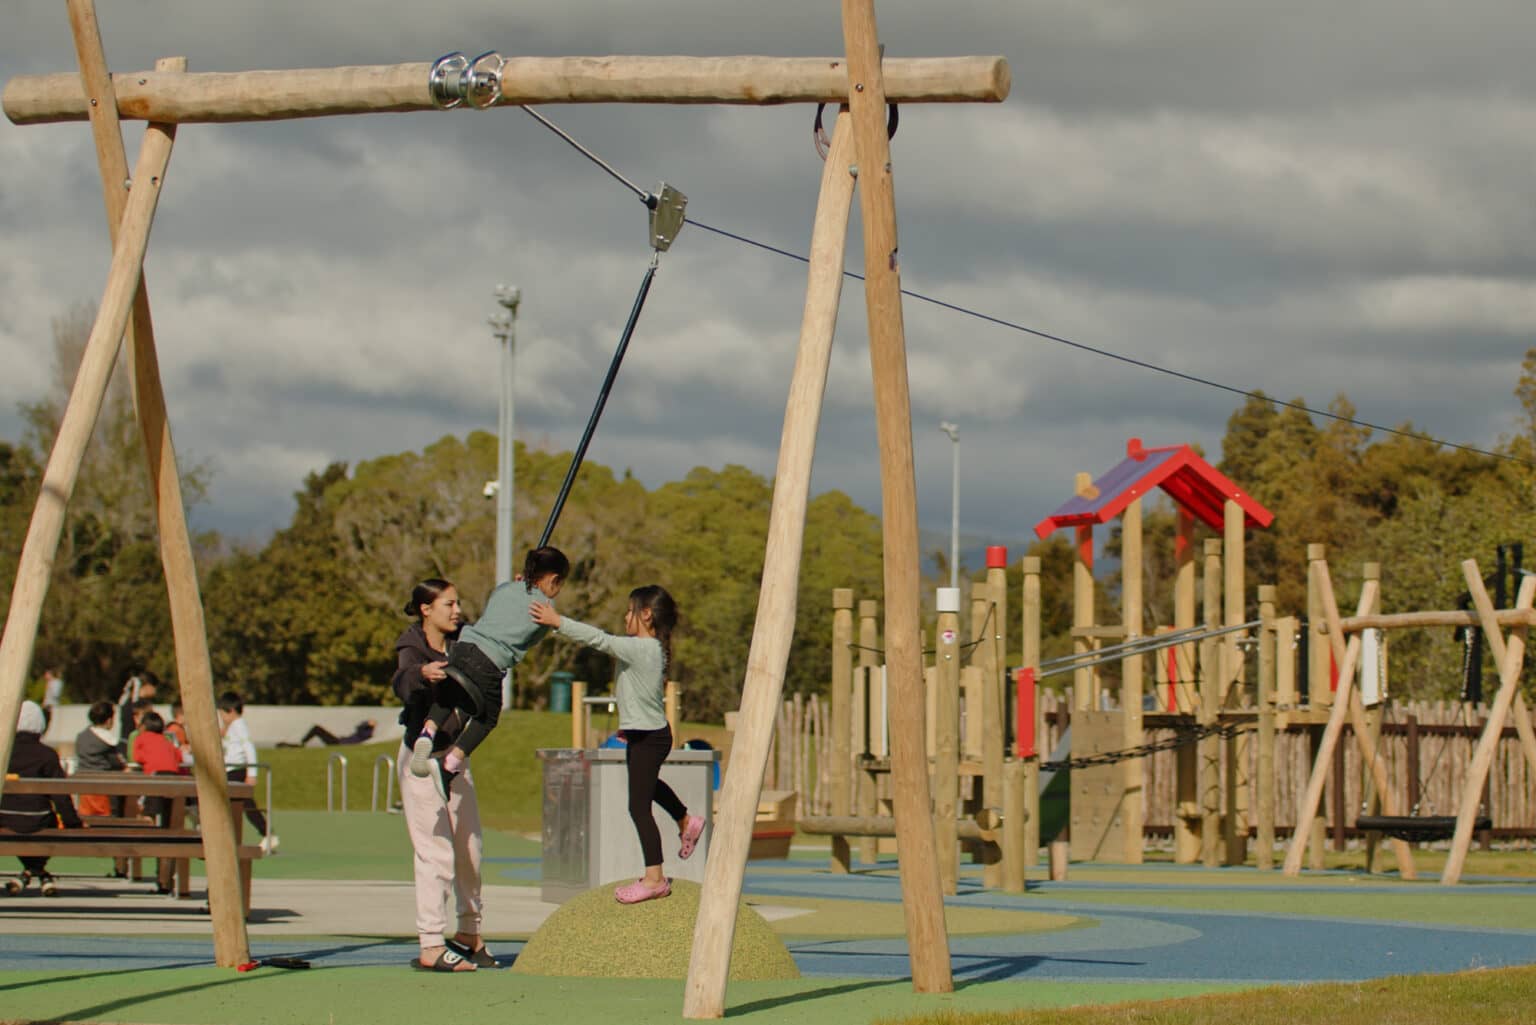 Flying foxes can be custom built and you don't need to reuse playground equipment.